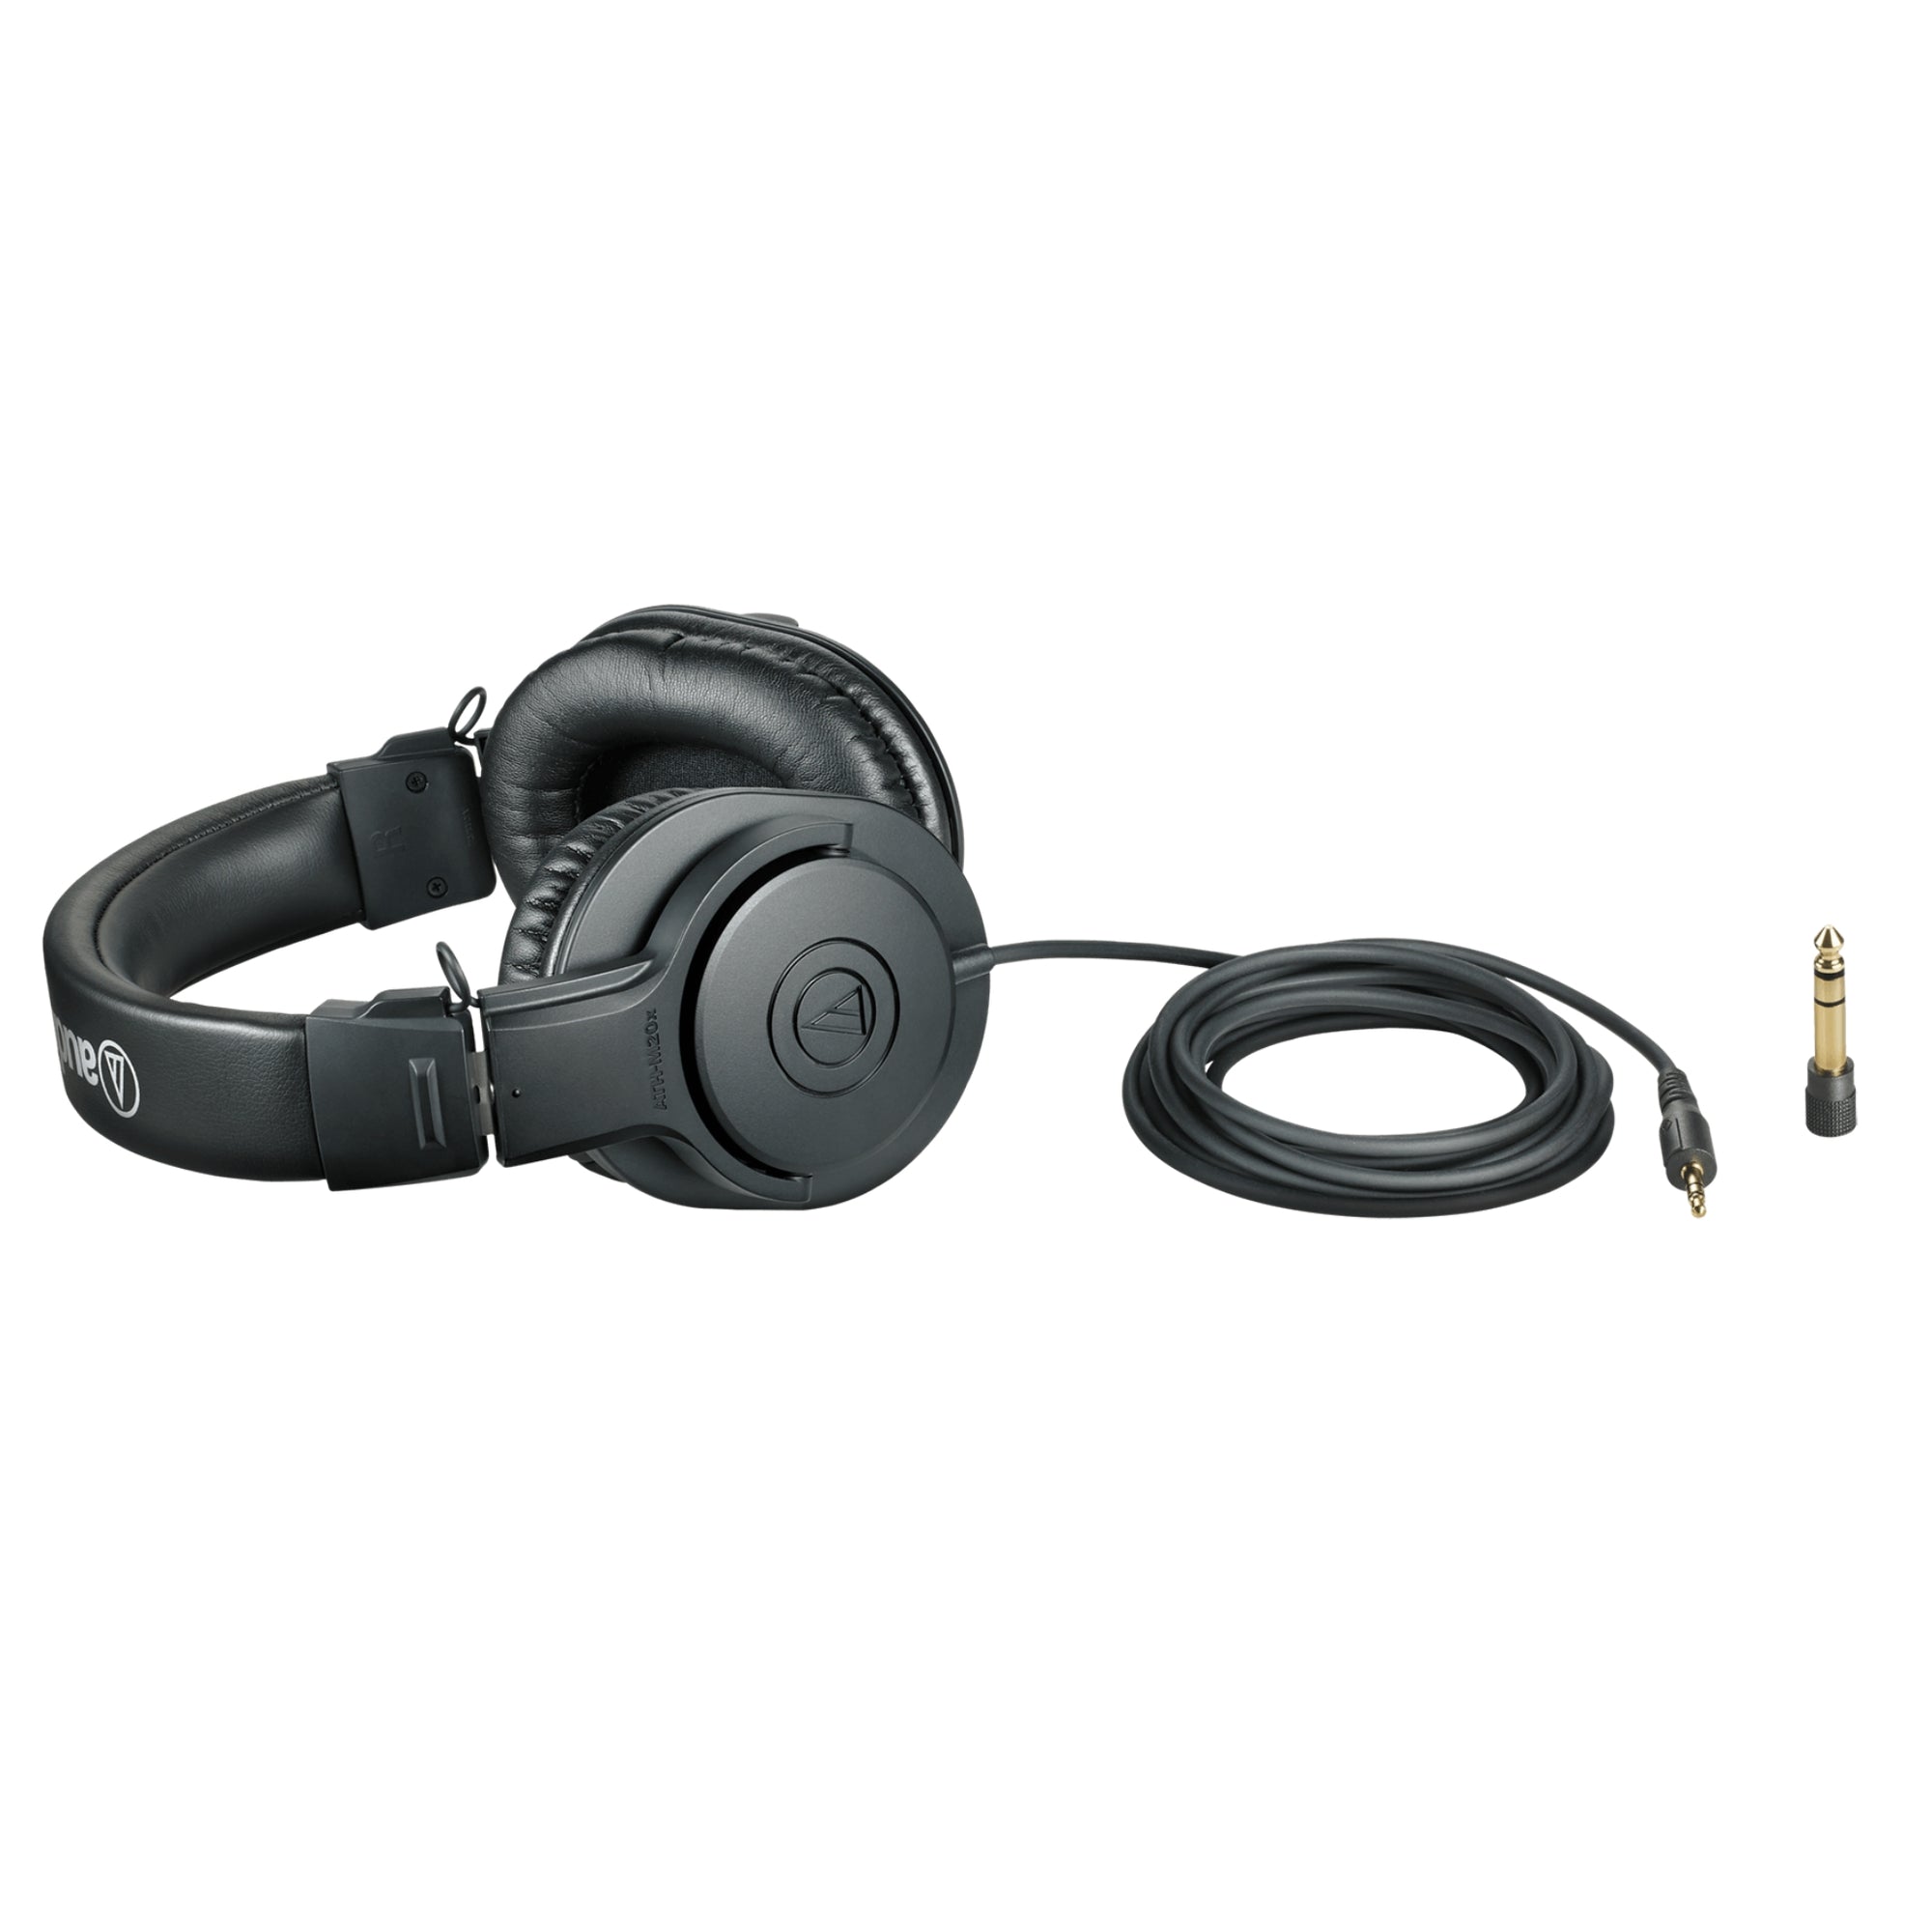 Audio Technica Professional Monitor Headphones ATH-M20X with Adapter